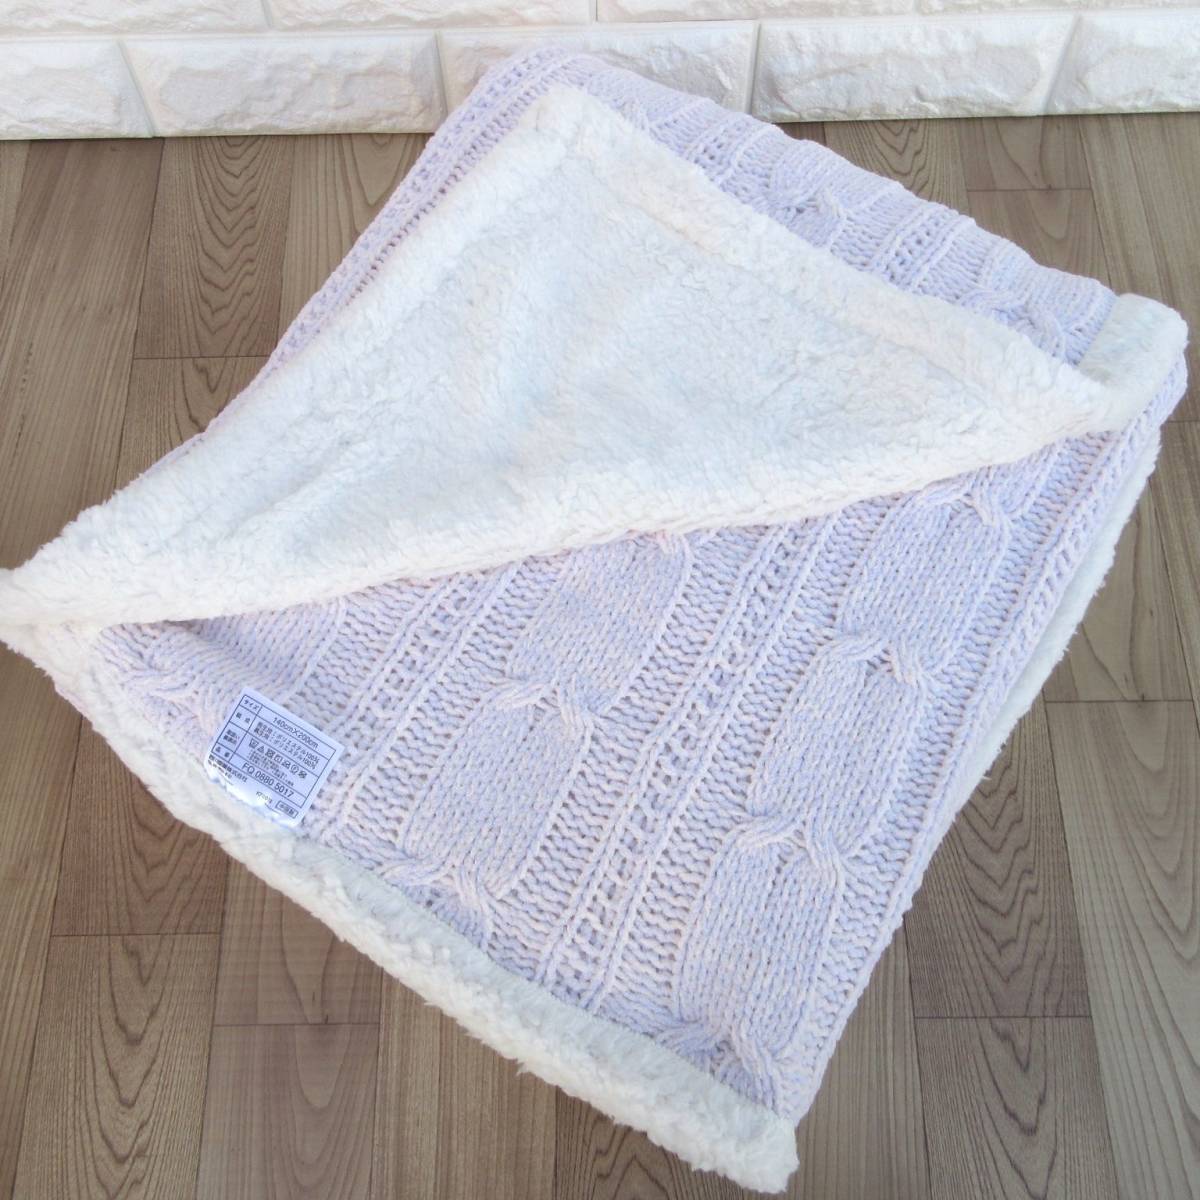  new goods * free shipping * west river Le midiru* midi knitted blanket blanket single size reverse side sheep .... warm retail price 8,800. half-price and downward!! pink 